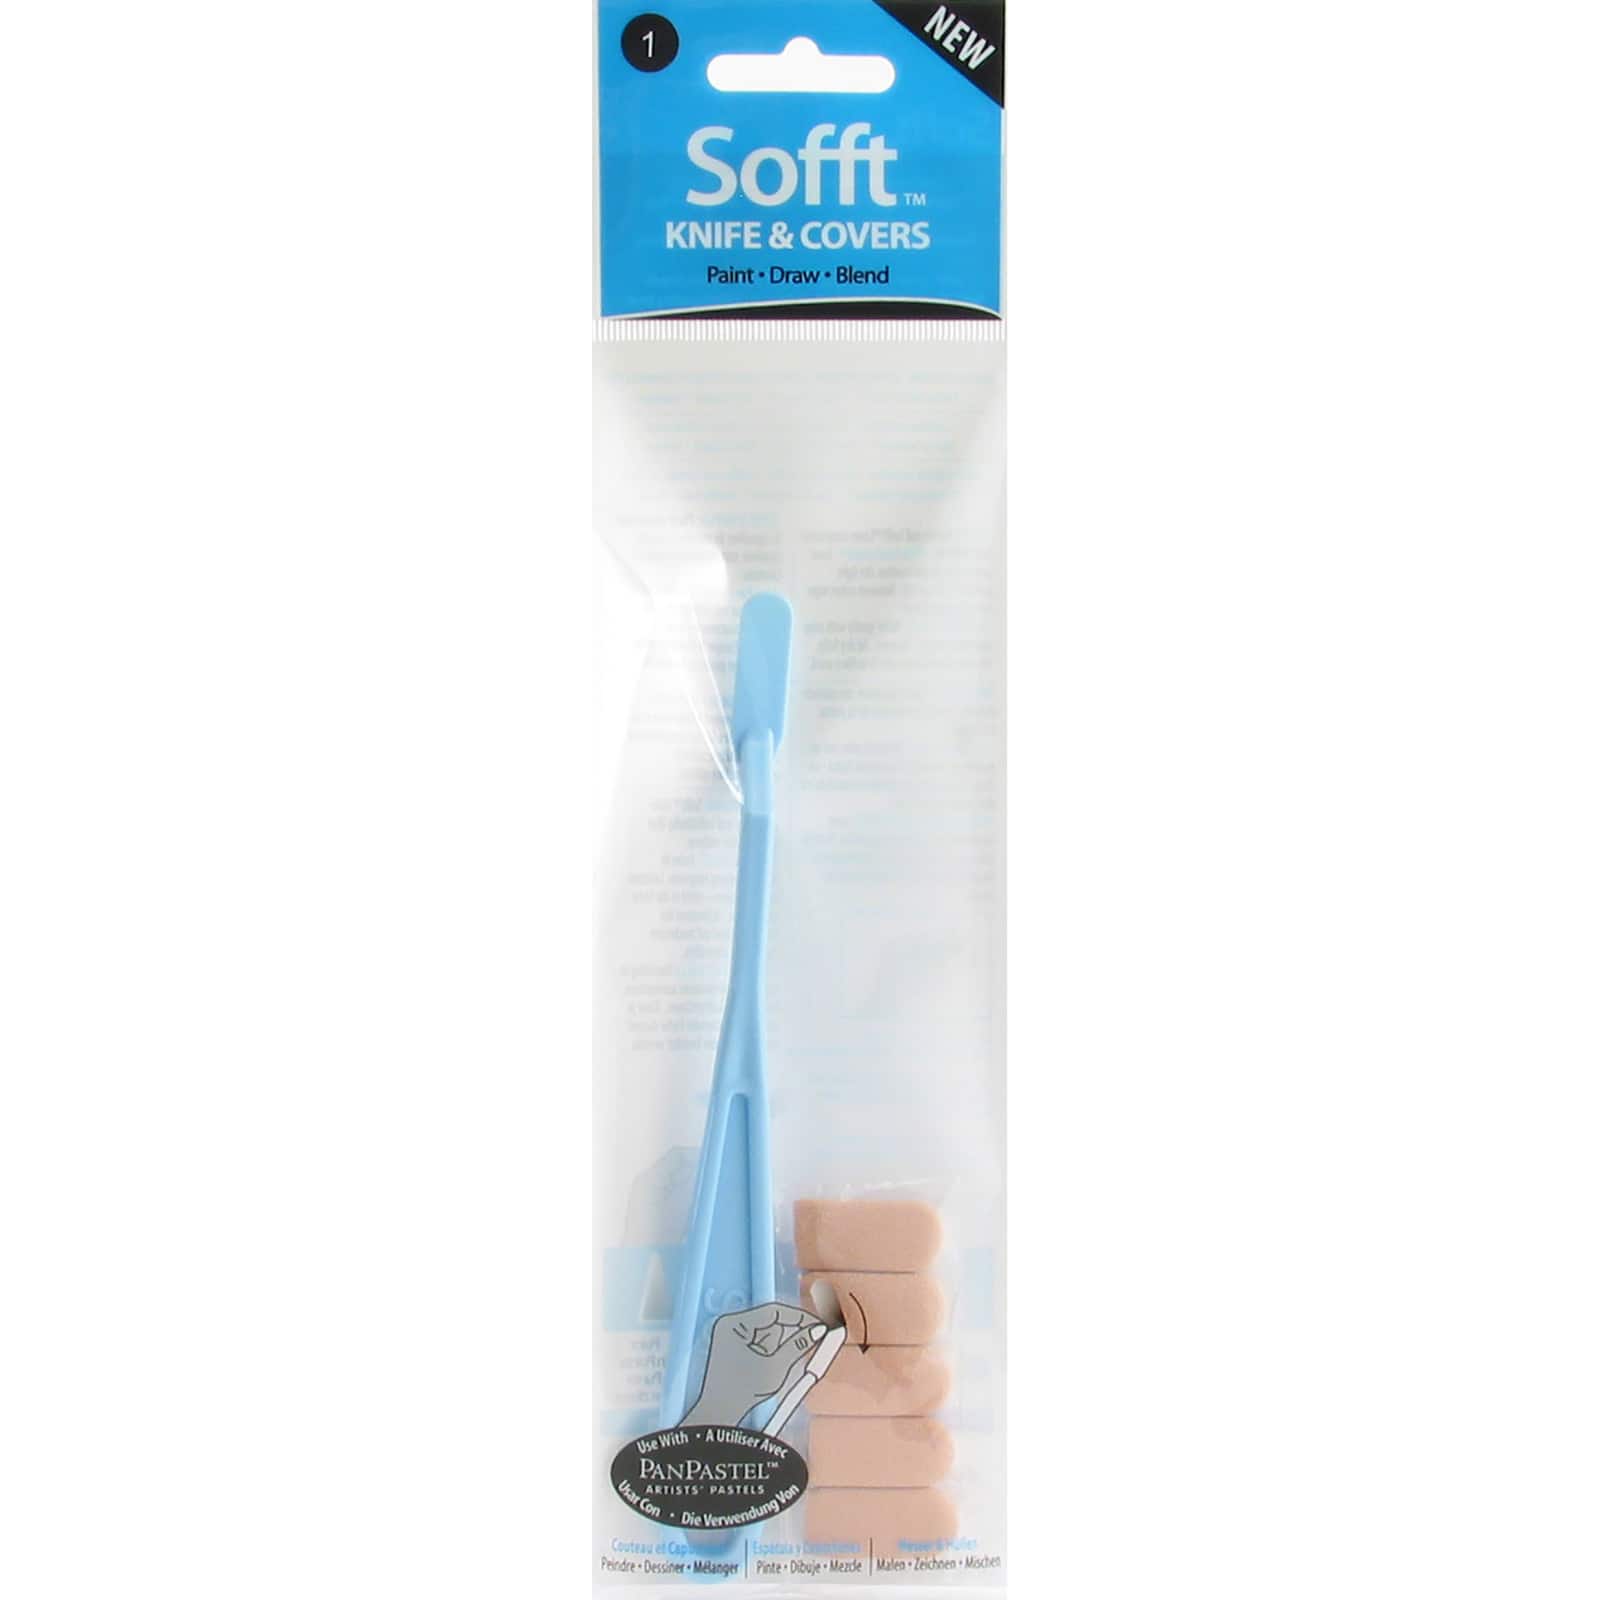 Colorfin Sofft&#x2122; Tools No. 1 Round Knife with 5 Covers